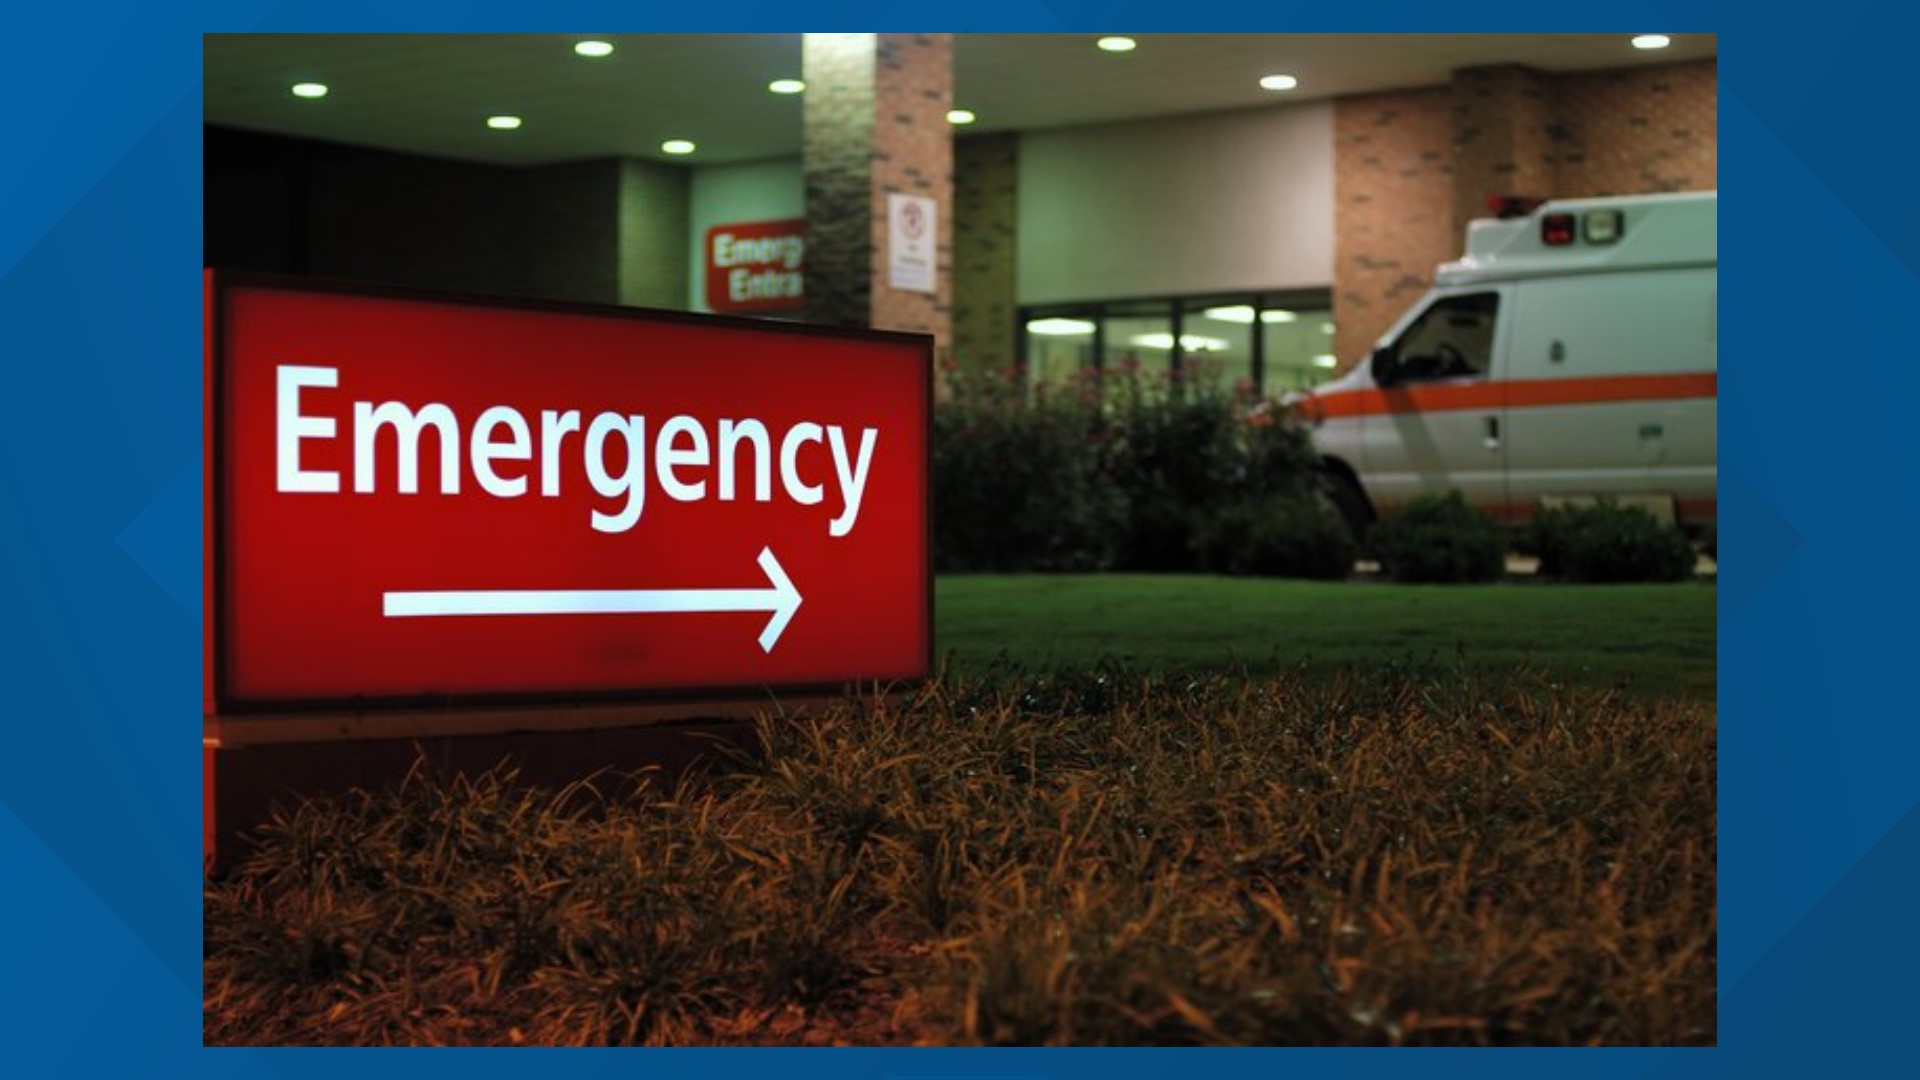 According to Medicare.gov, patients many Pennsylvania emergency rooms wait between 2-3 hours.